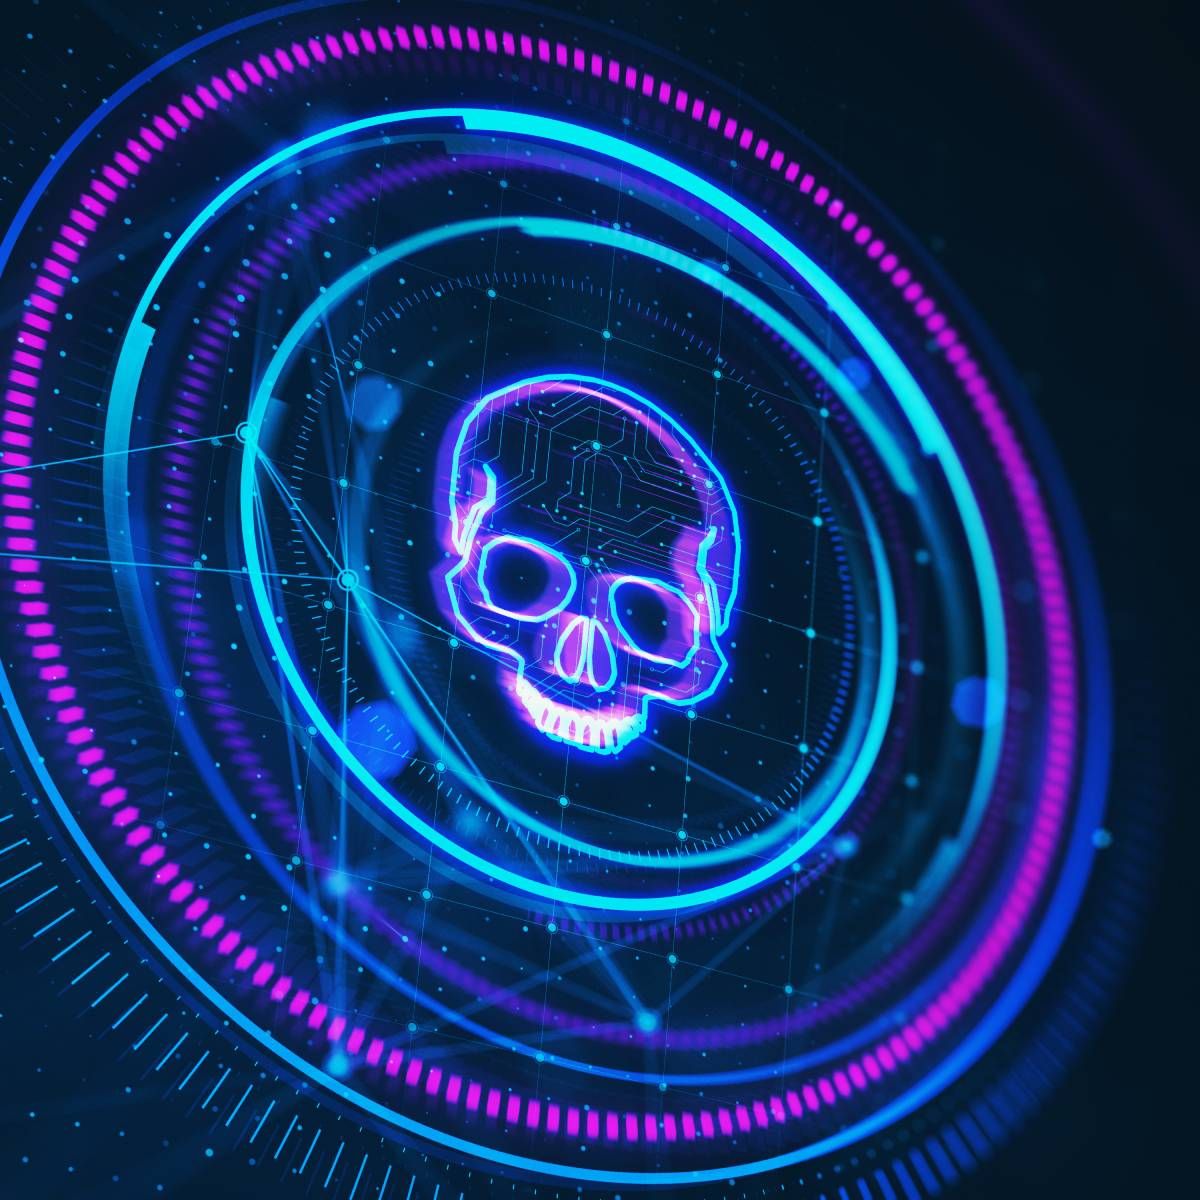 Abstract image of neon skull within concentric blue and purple circles